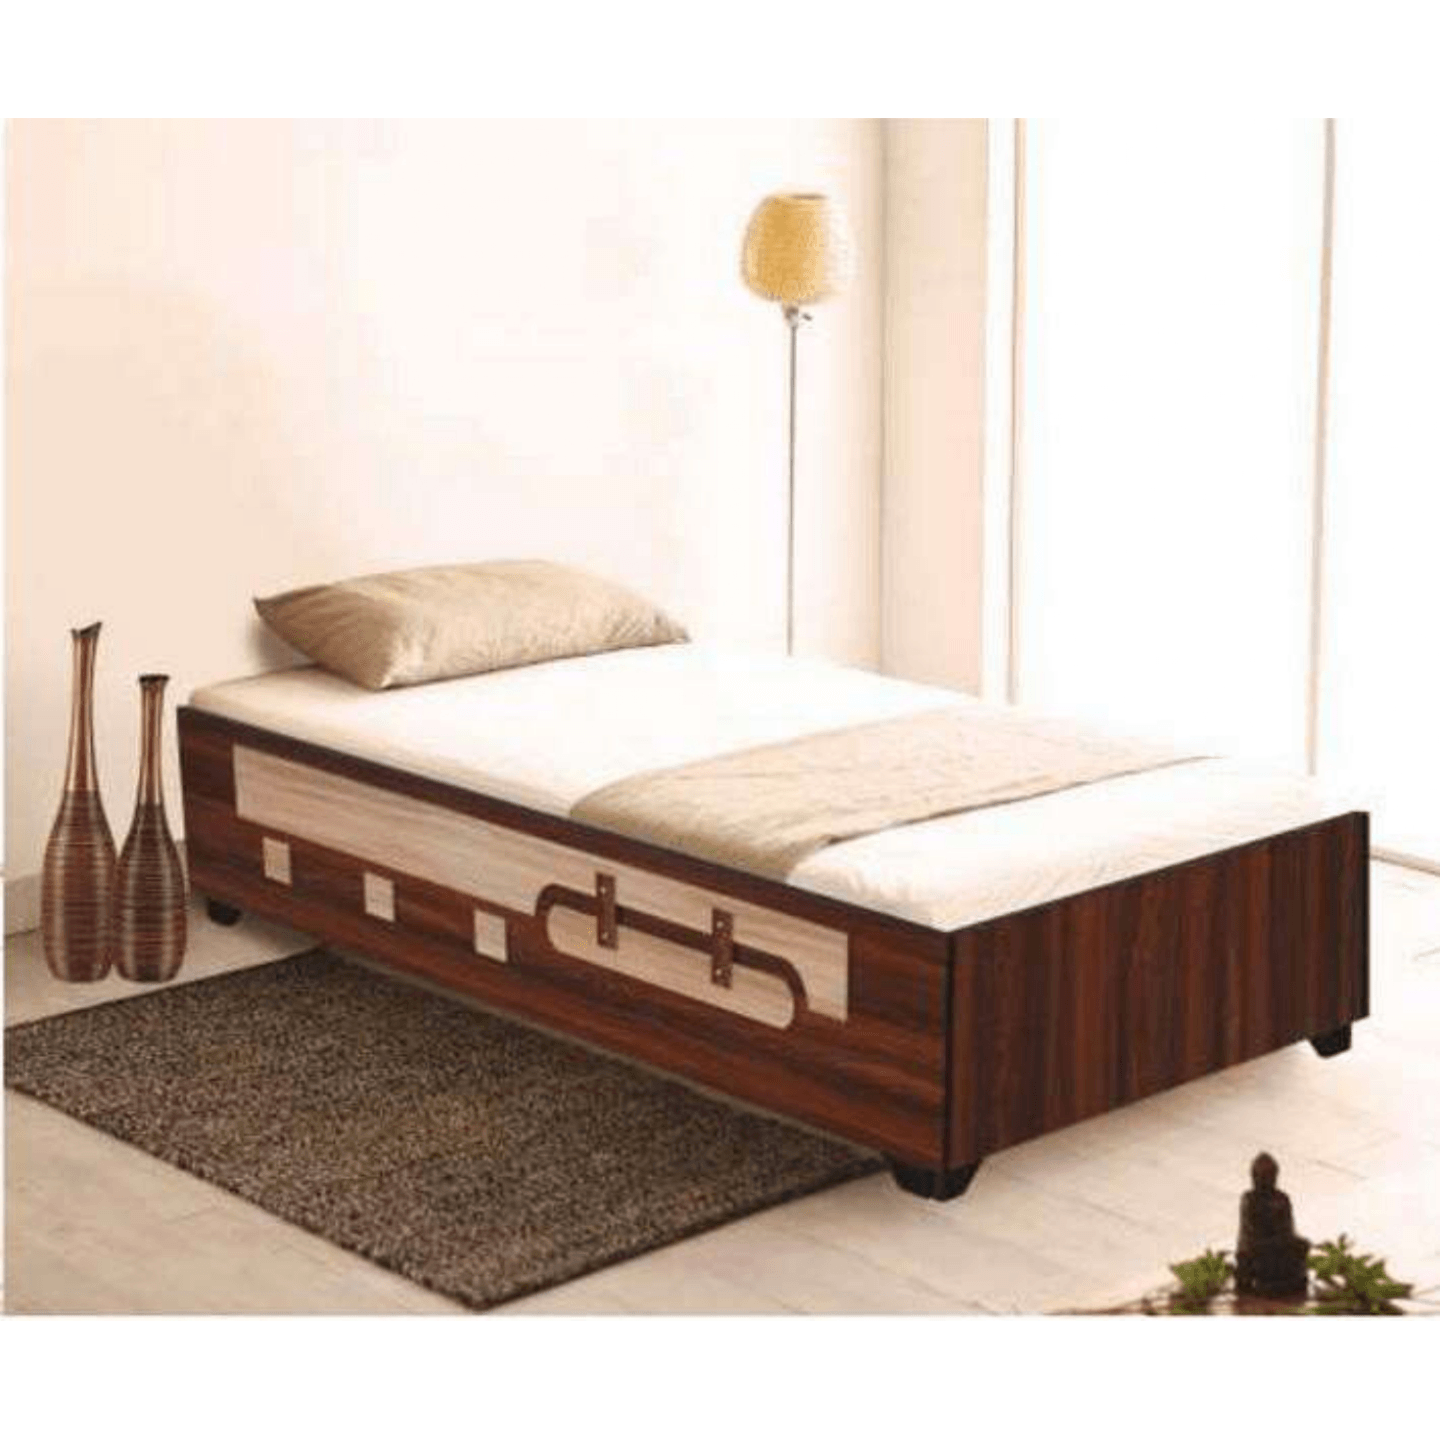 HS Single Bed Size 72"x30" Centra In Brown Colour